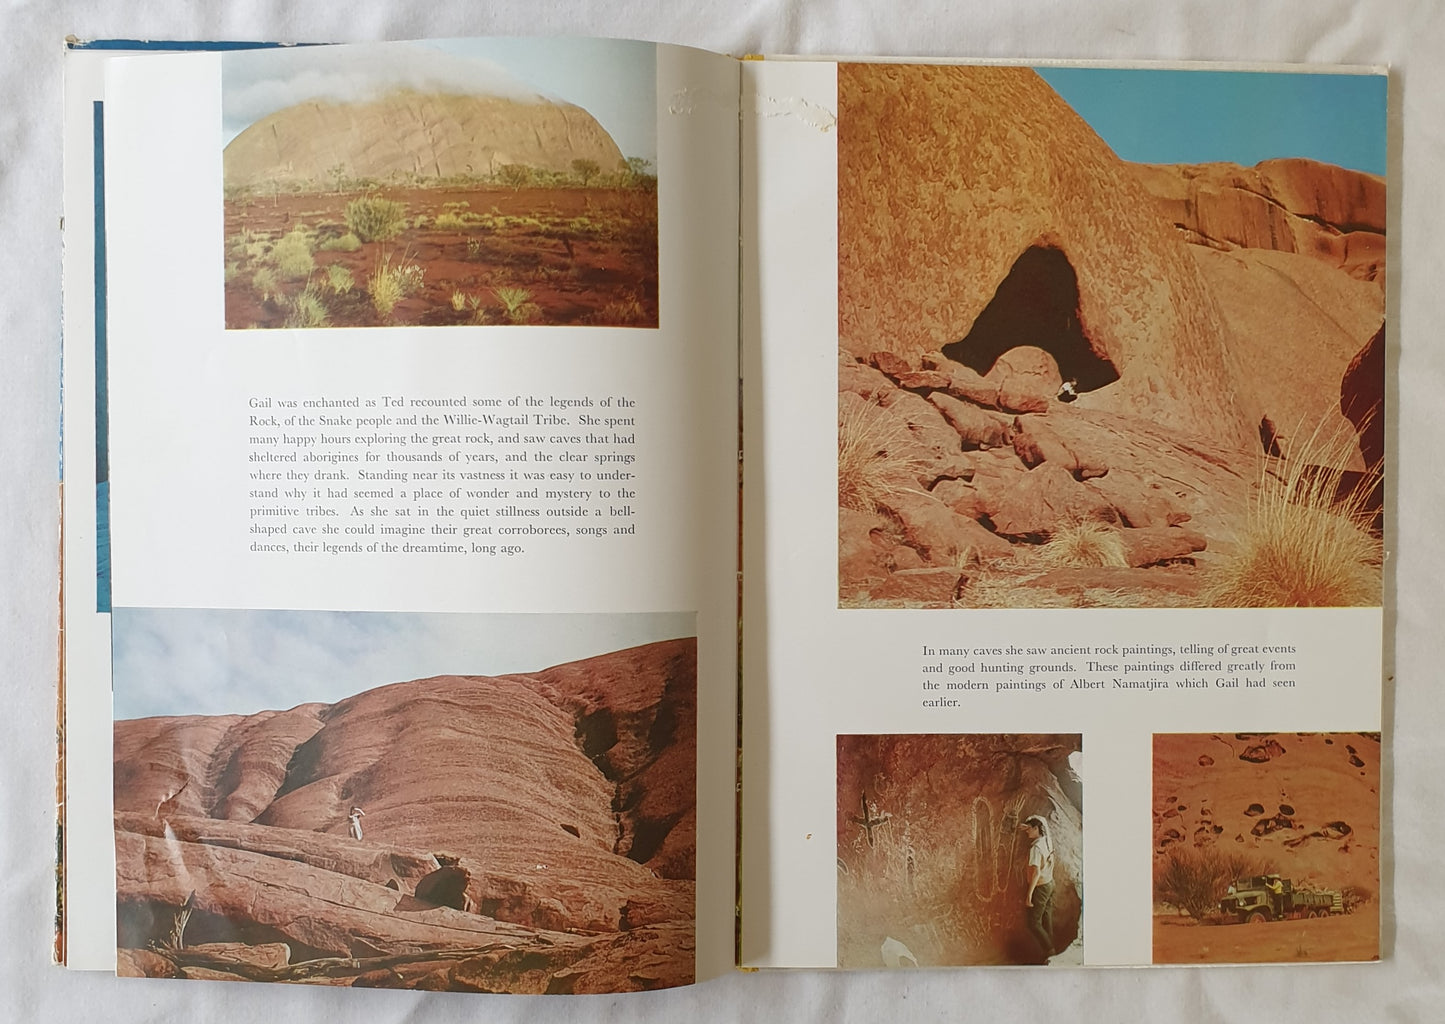 Journey to the Red Rock by Bruce and June MacPherson